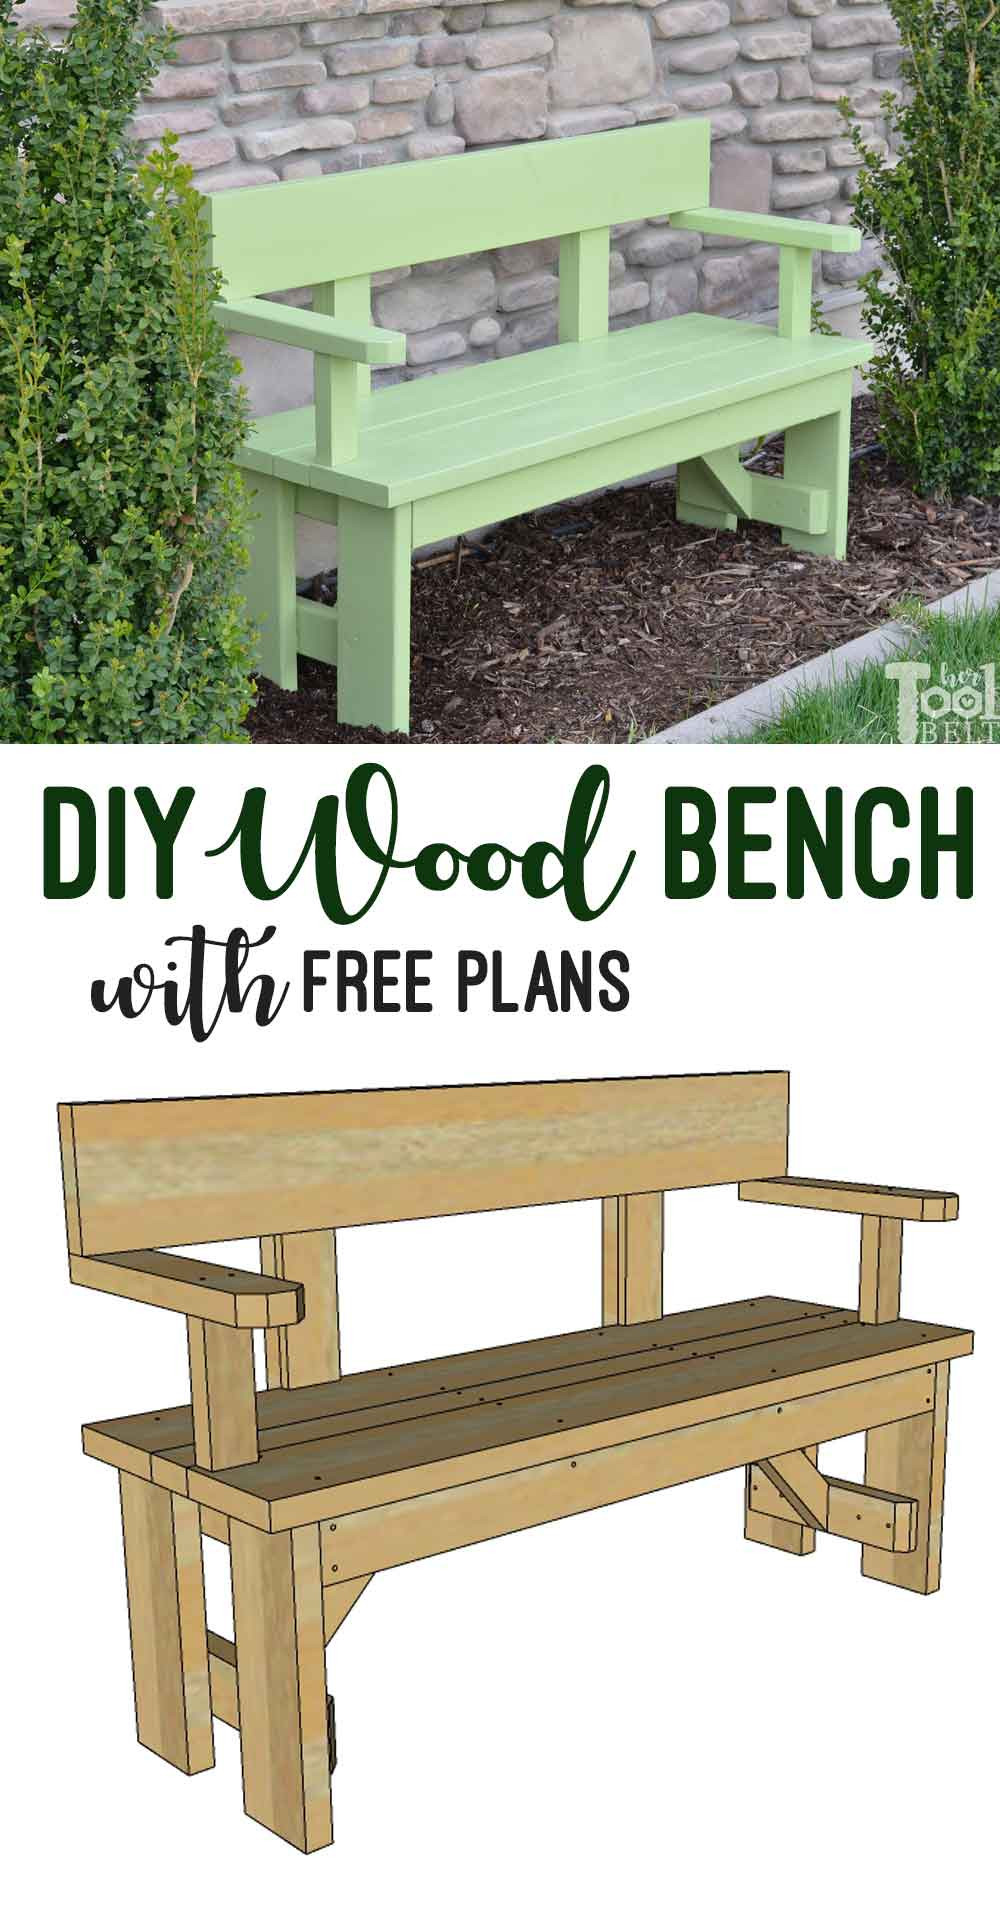 Wood Benches DIY
 DIY Wood Bench with Back Plans Her Tool Belt